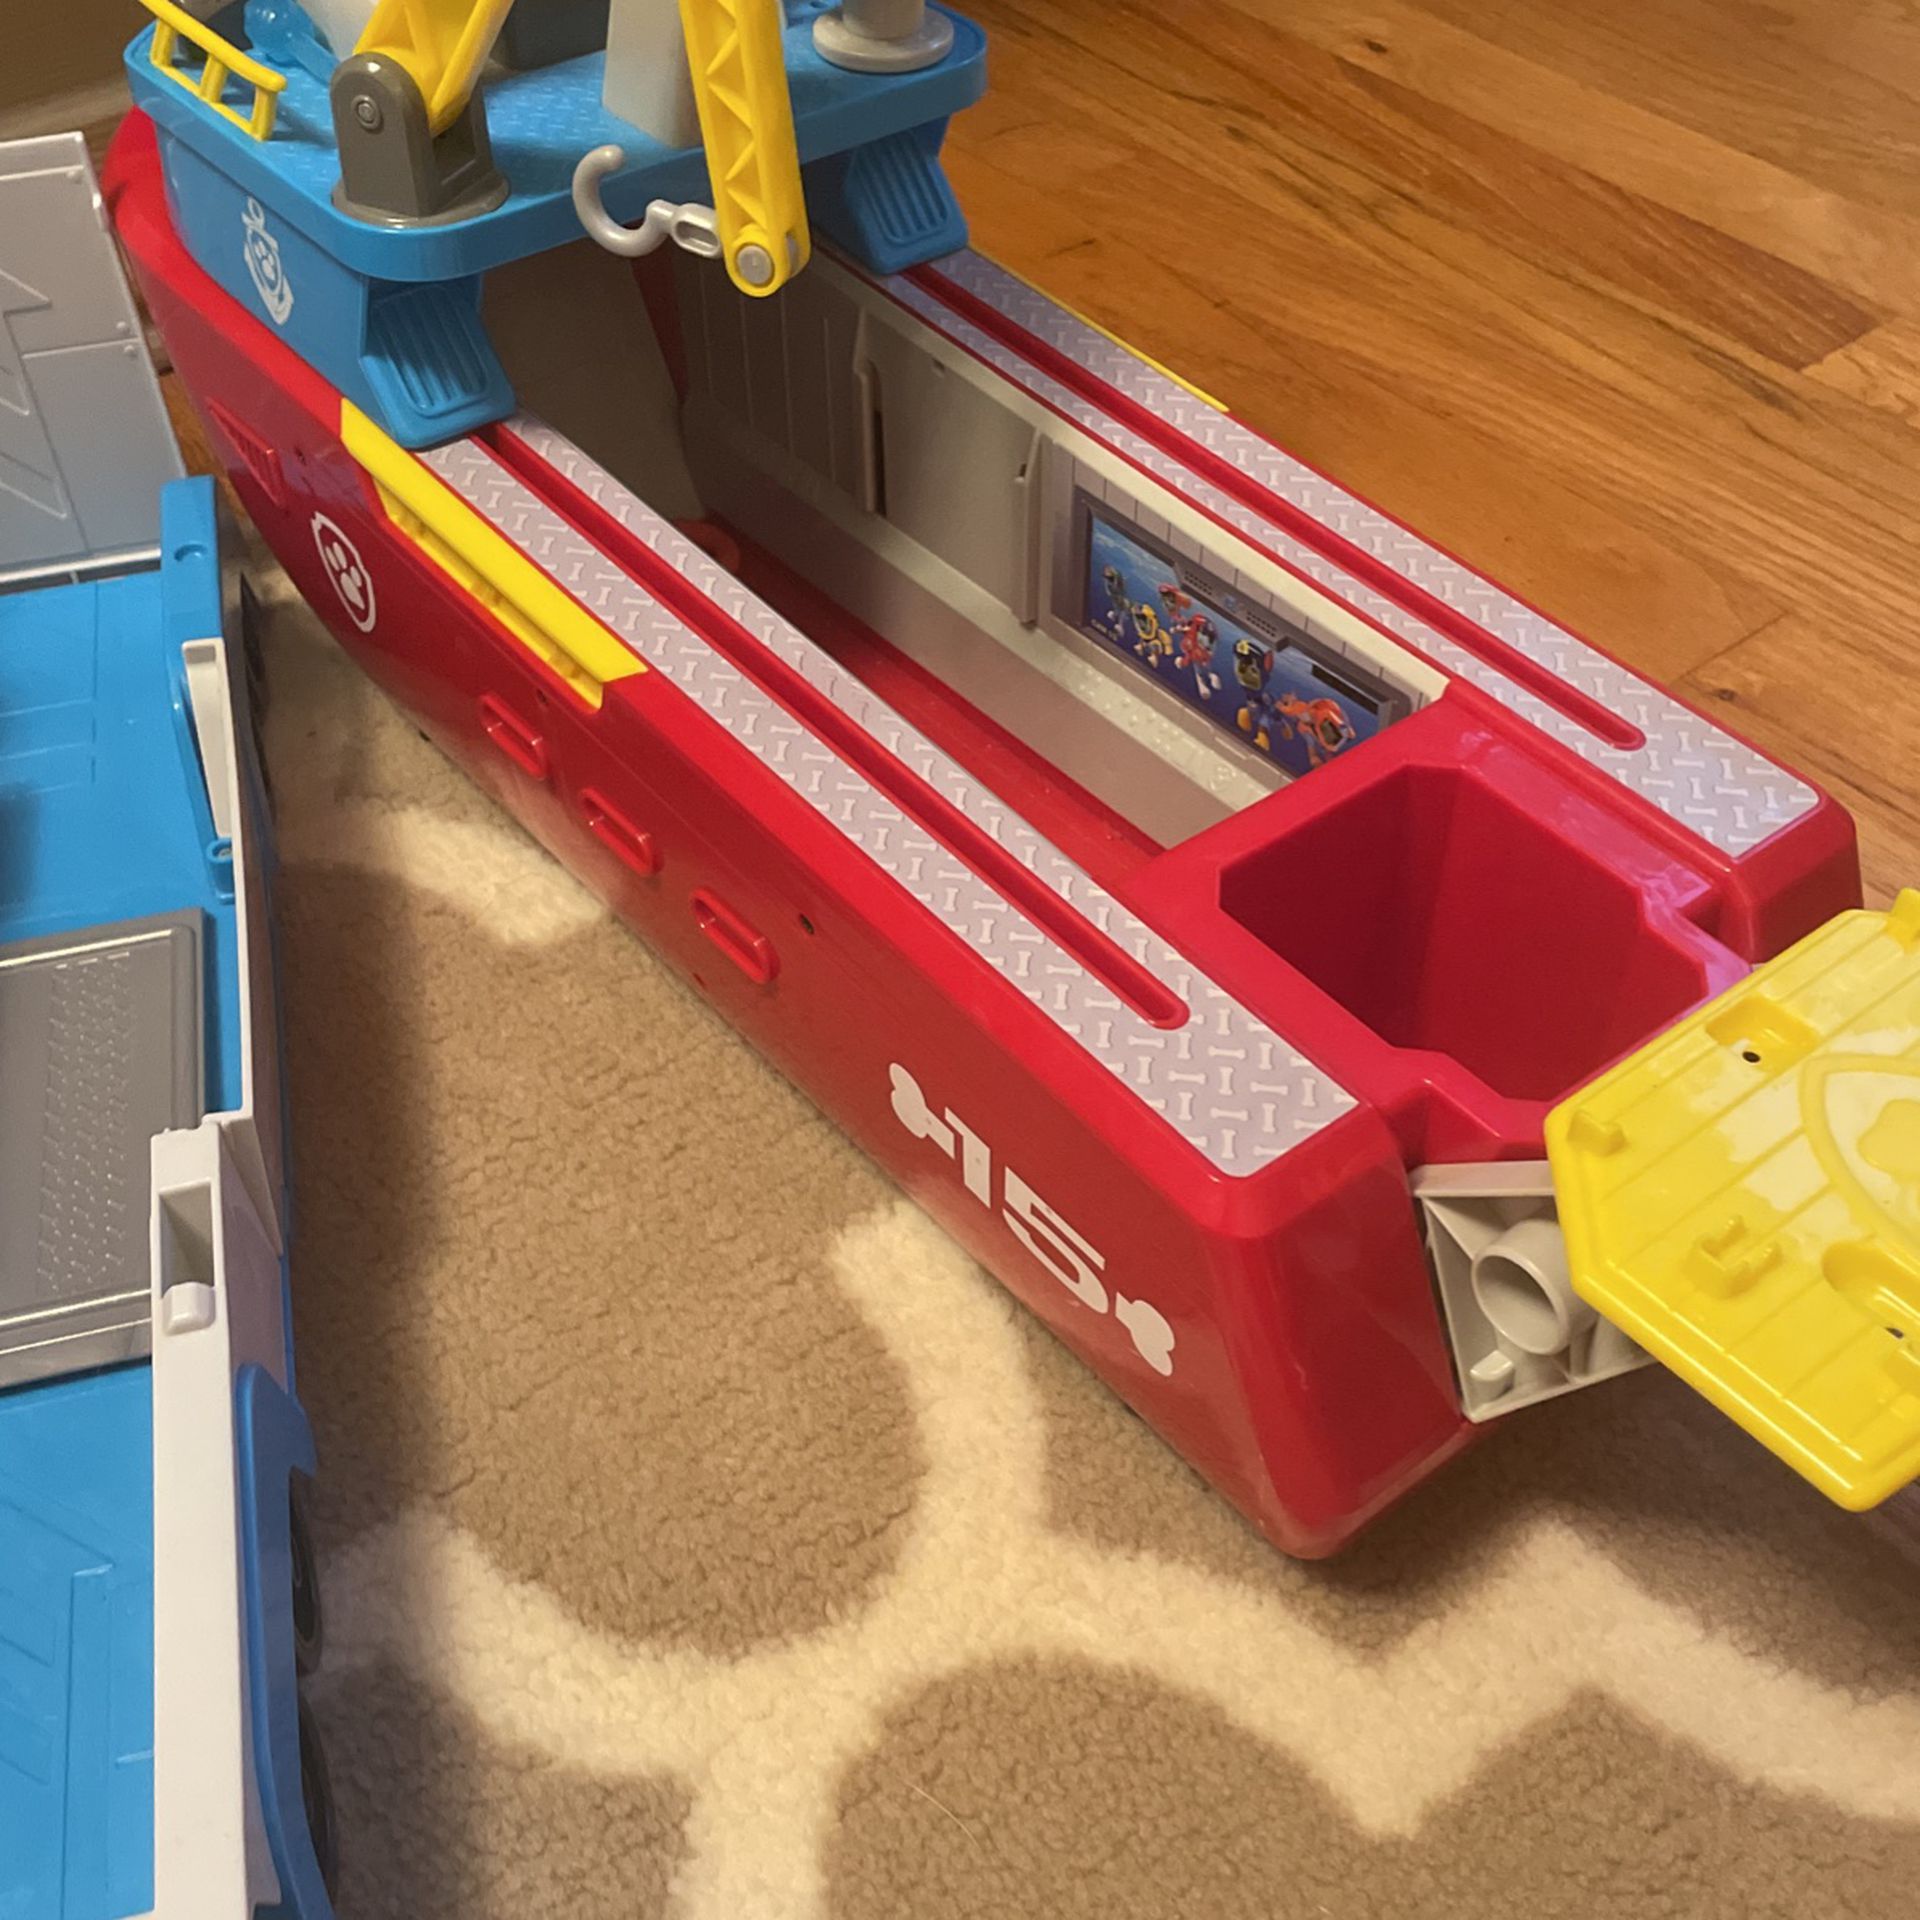 Paw Patrol Vehicles And Figures